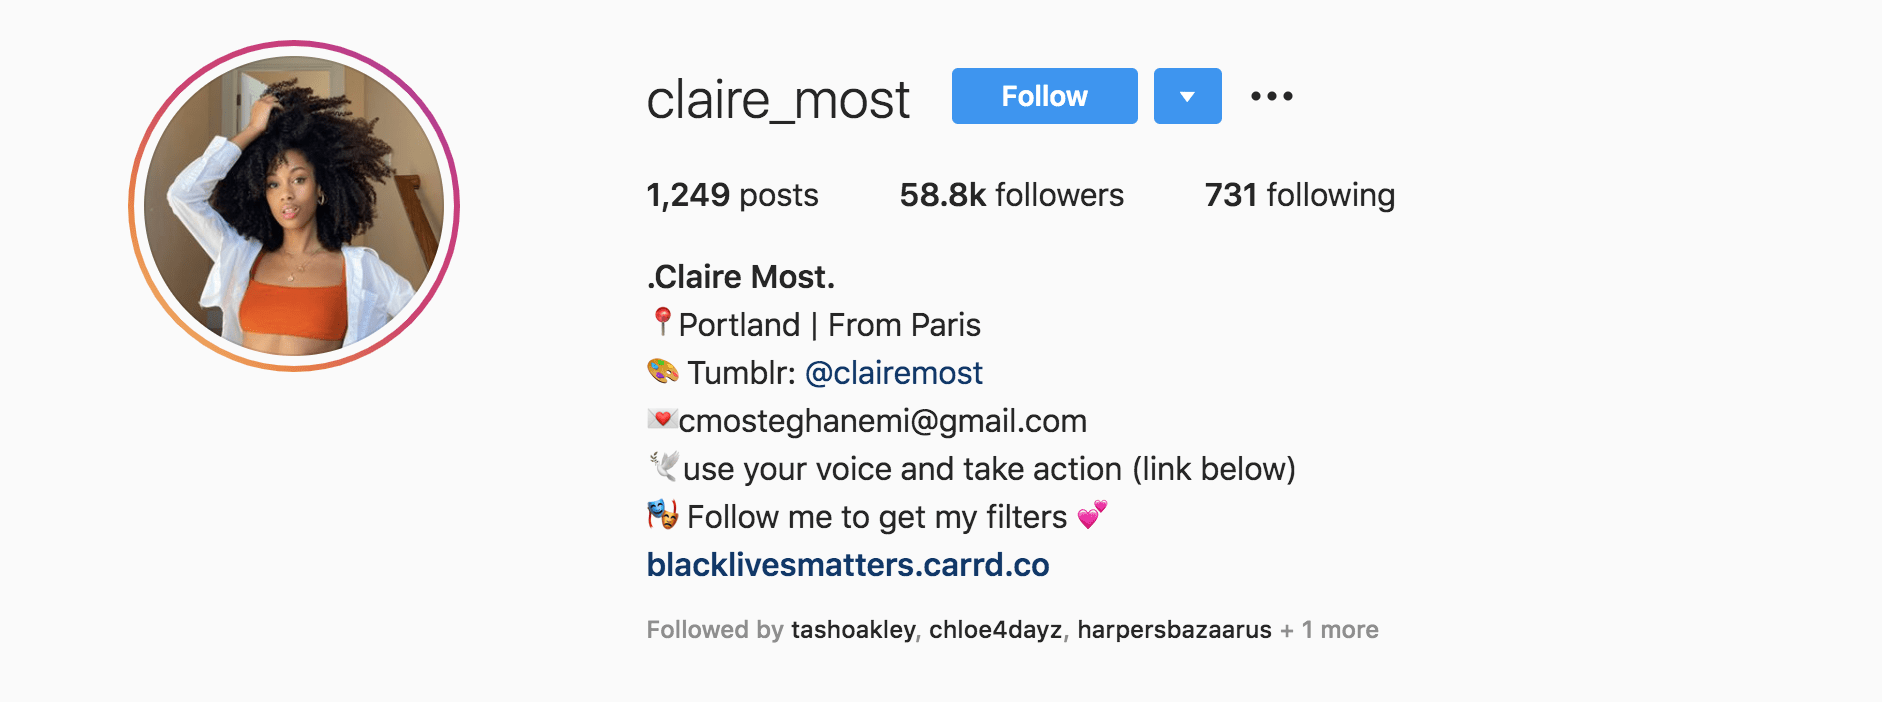 Top Fashion Influencers - Claire Most